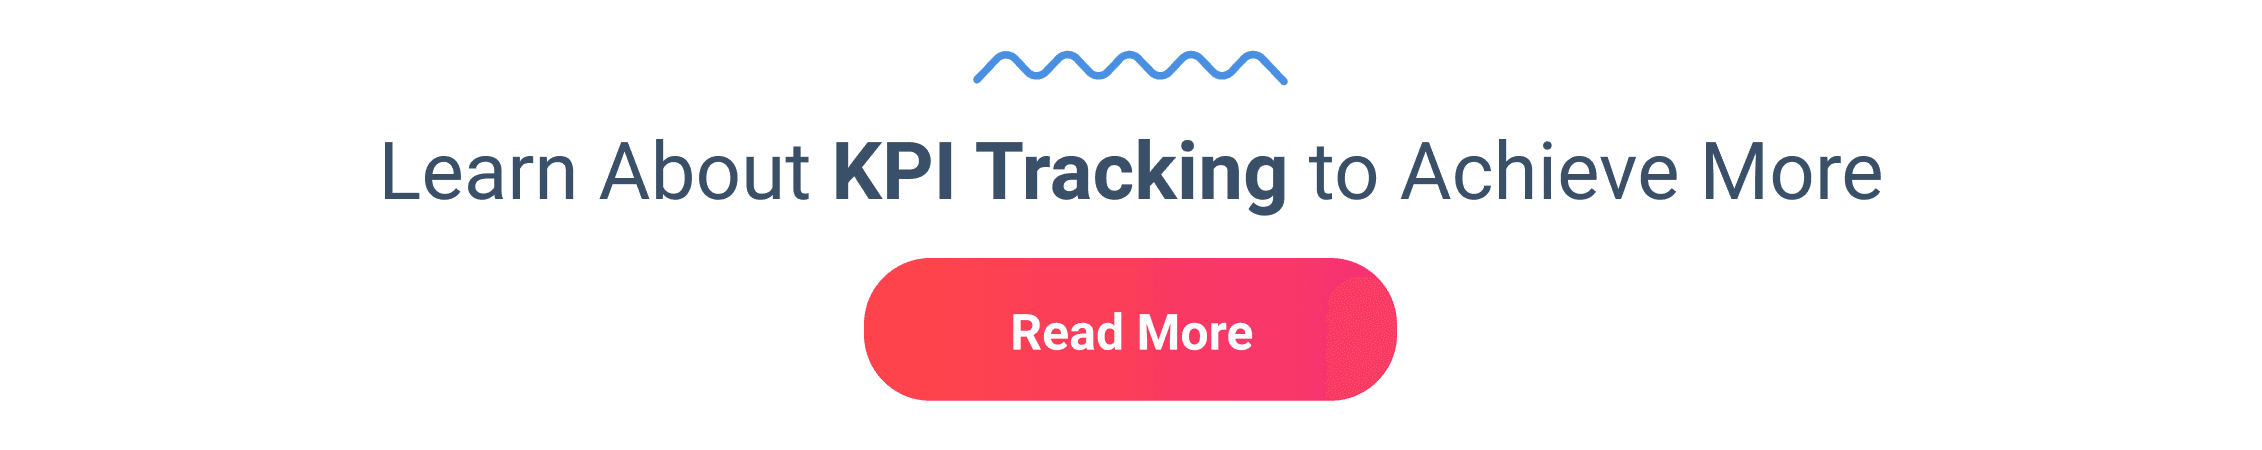 Learn about KPI tracking to achieve more banner